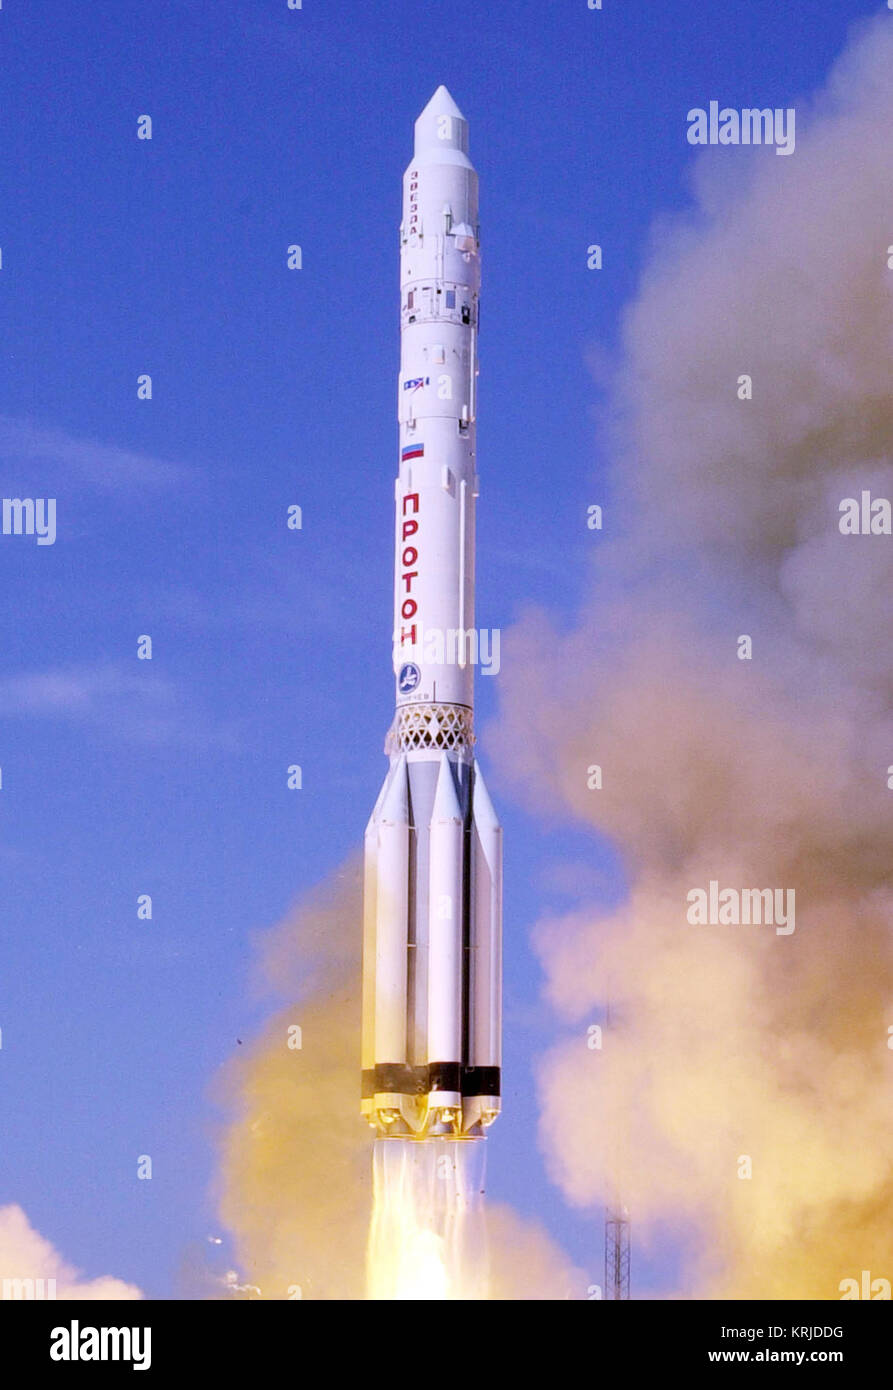 Photo credit; Scott Andrews/NASA   Caption; A proton  booster lifts off from the Bykanor Cosmodrome carrying the Zvesda, the third element of the International Space Staion   Date; 12 July, 2000 Proton Zvezda crop Stock Photo